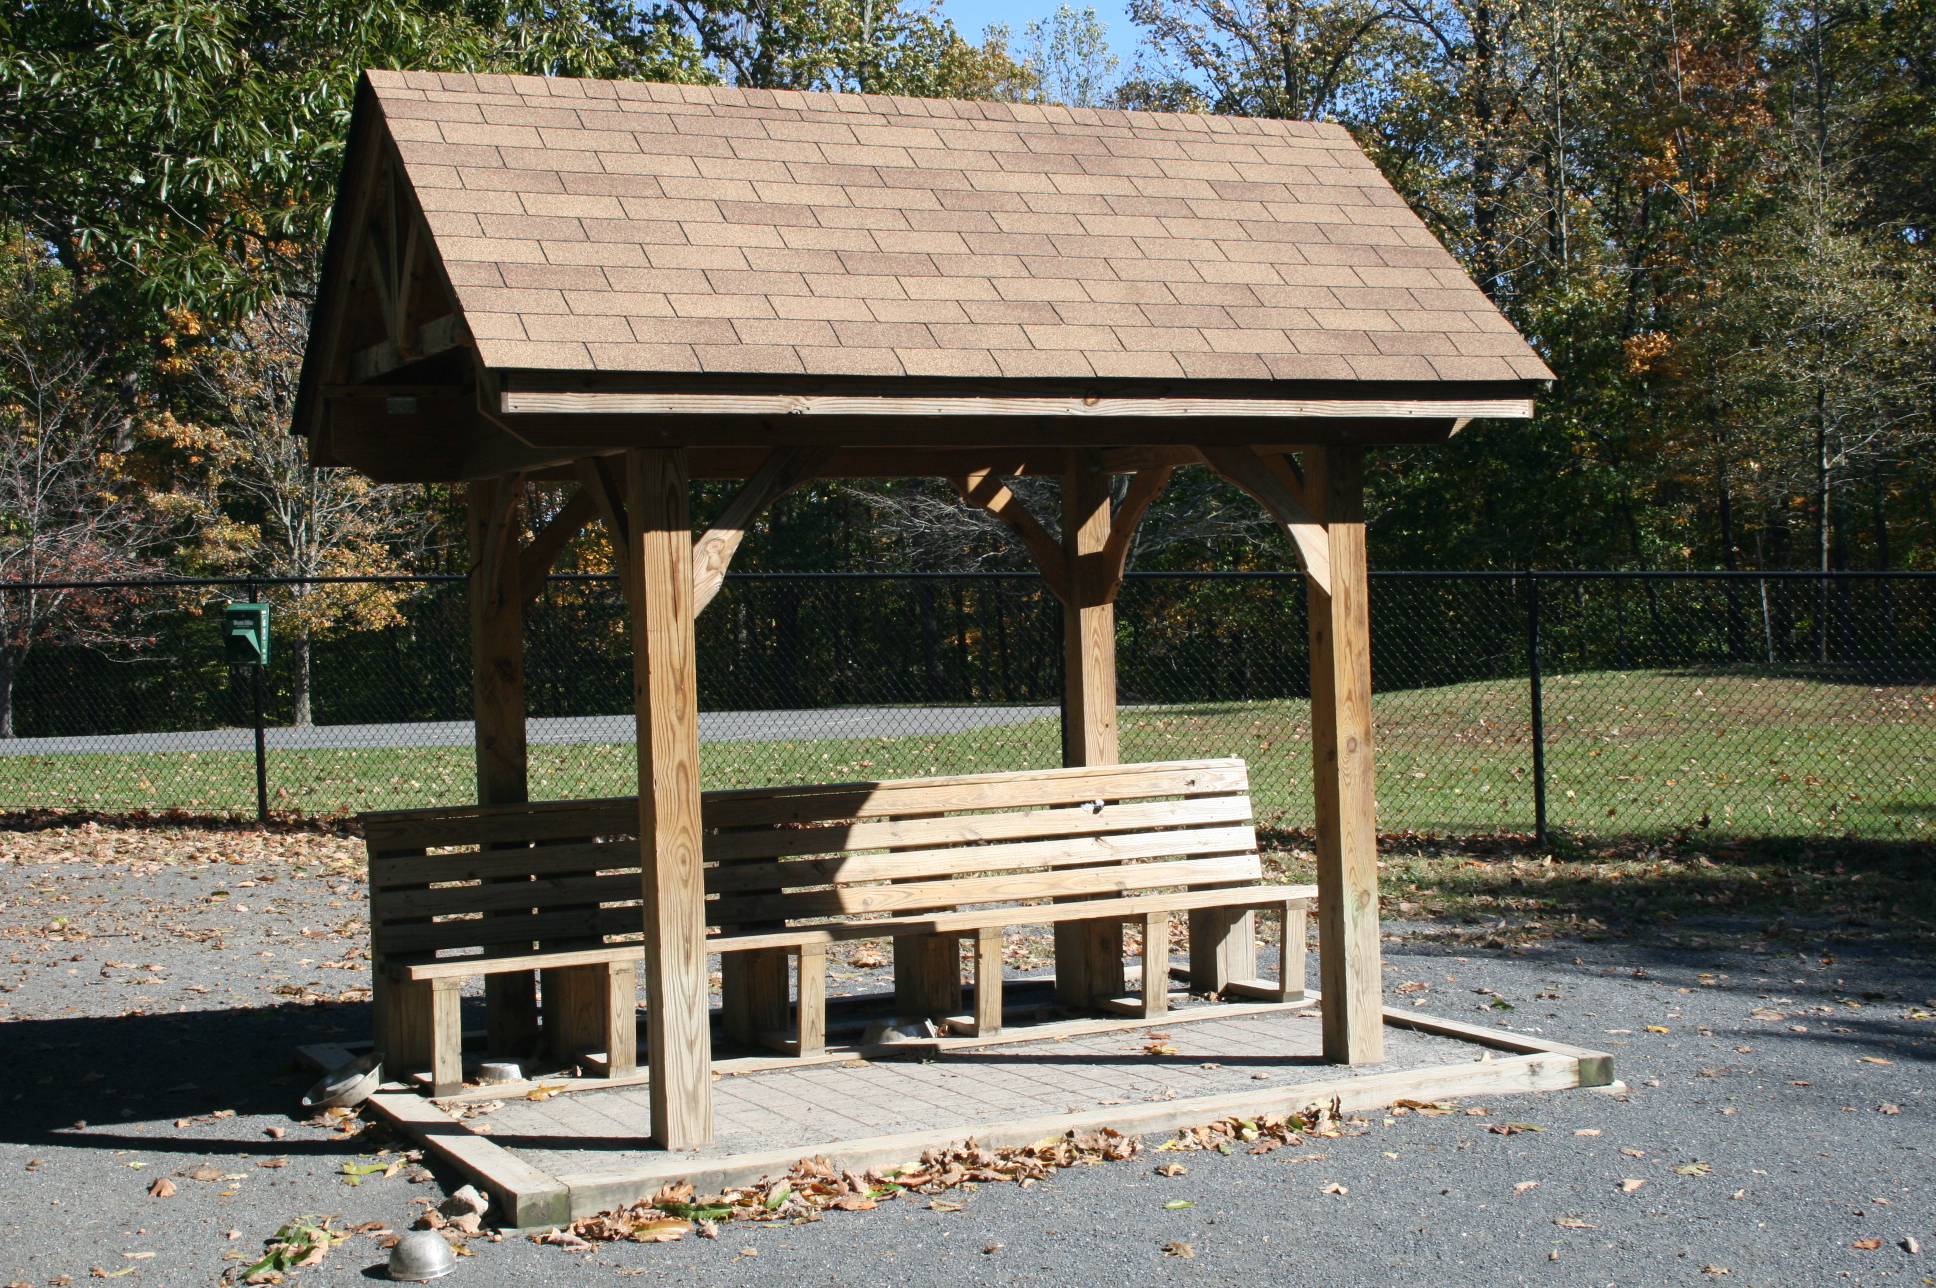 Small shelter with benches inside the dog park